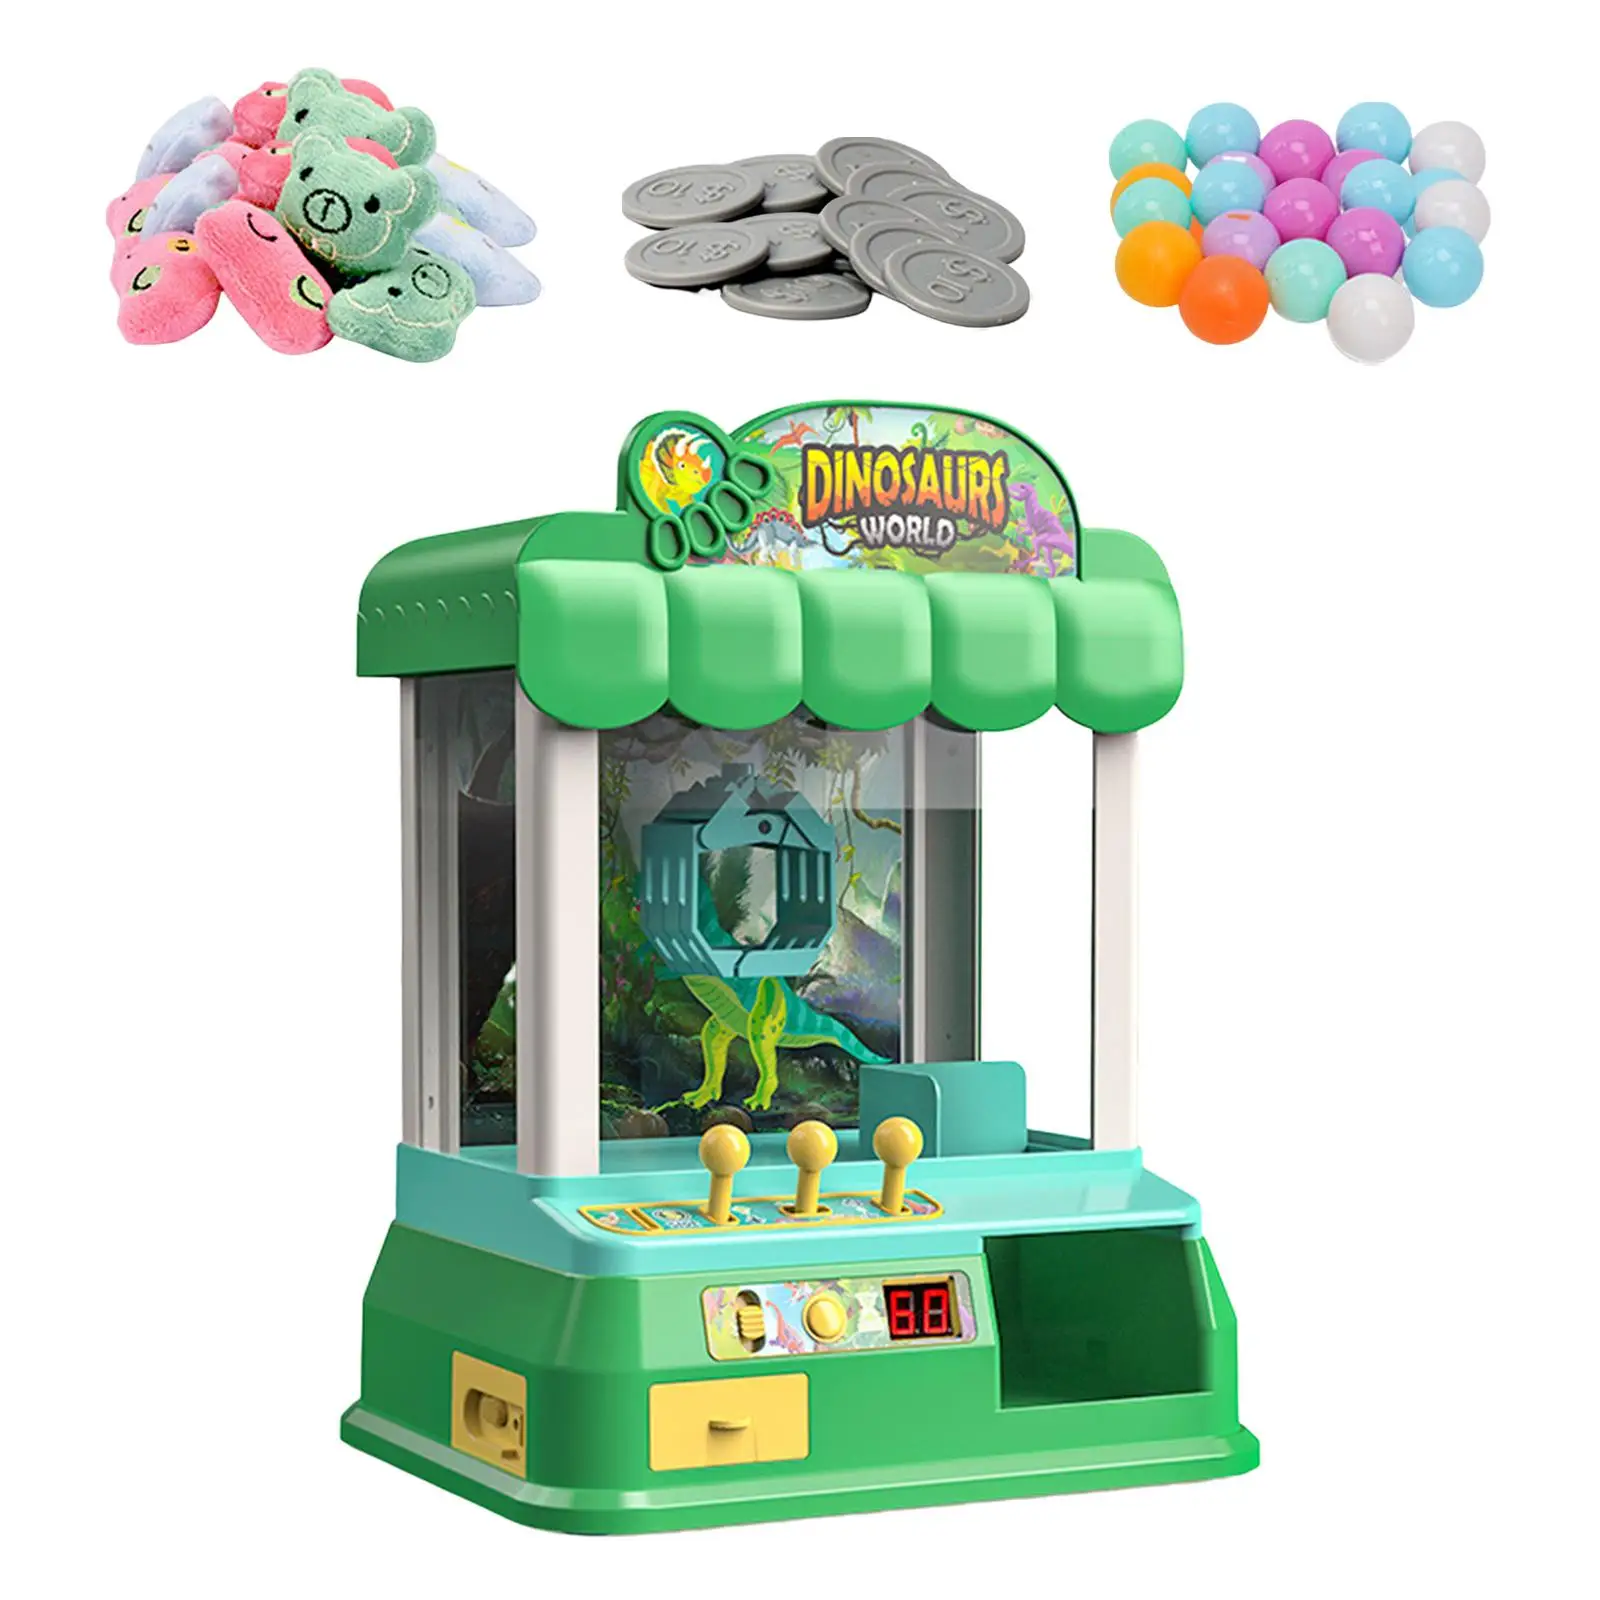 Toy Claw Machine Indoor Toy Birthday Gift Easy to Use Toy Grabber Dispenser